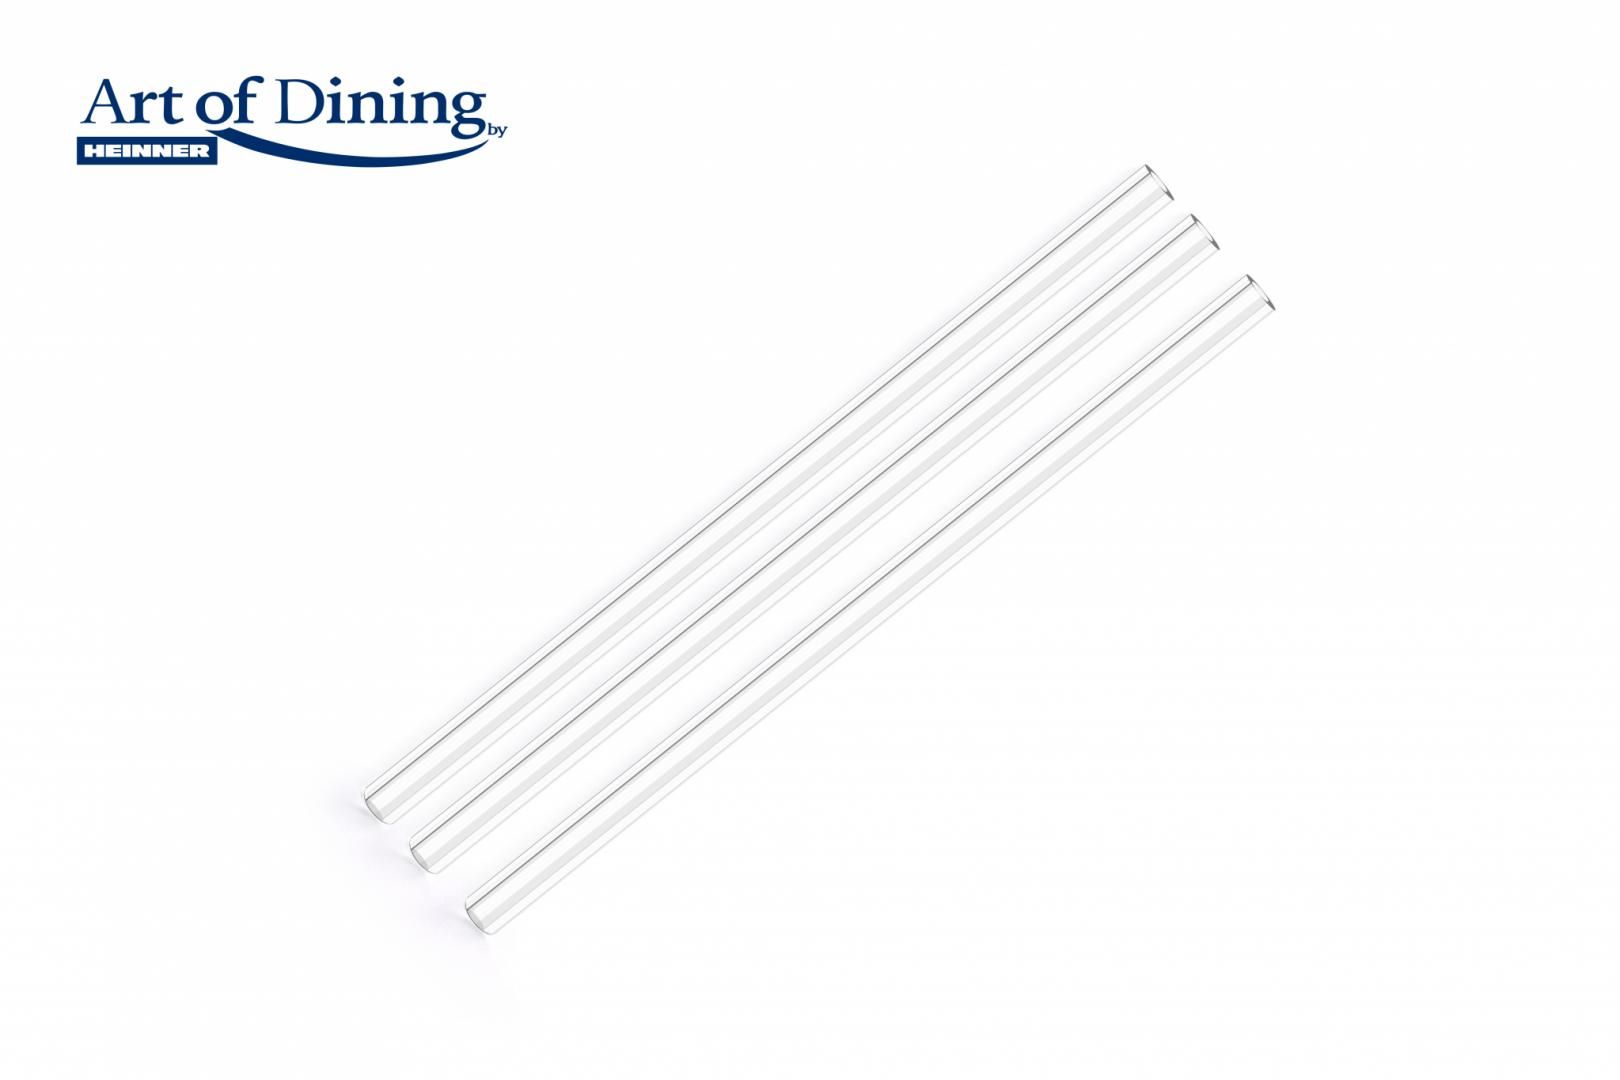 SET OF 6 STRAWS MADE OF GLASS + BRUSH FOR CLEANING the set contains: : 3 x straight straw + 3 x bent straw + 1 x brush for cleaning Sizes:200*8mm Weight / straw : 14.5g Material thickness:1.5 mm Color: transparent_8